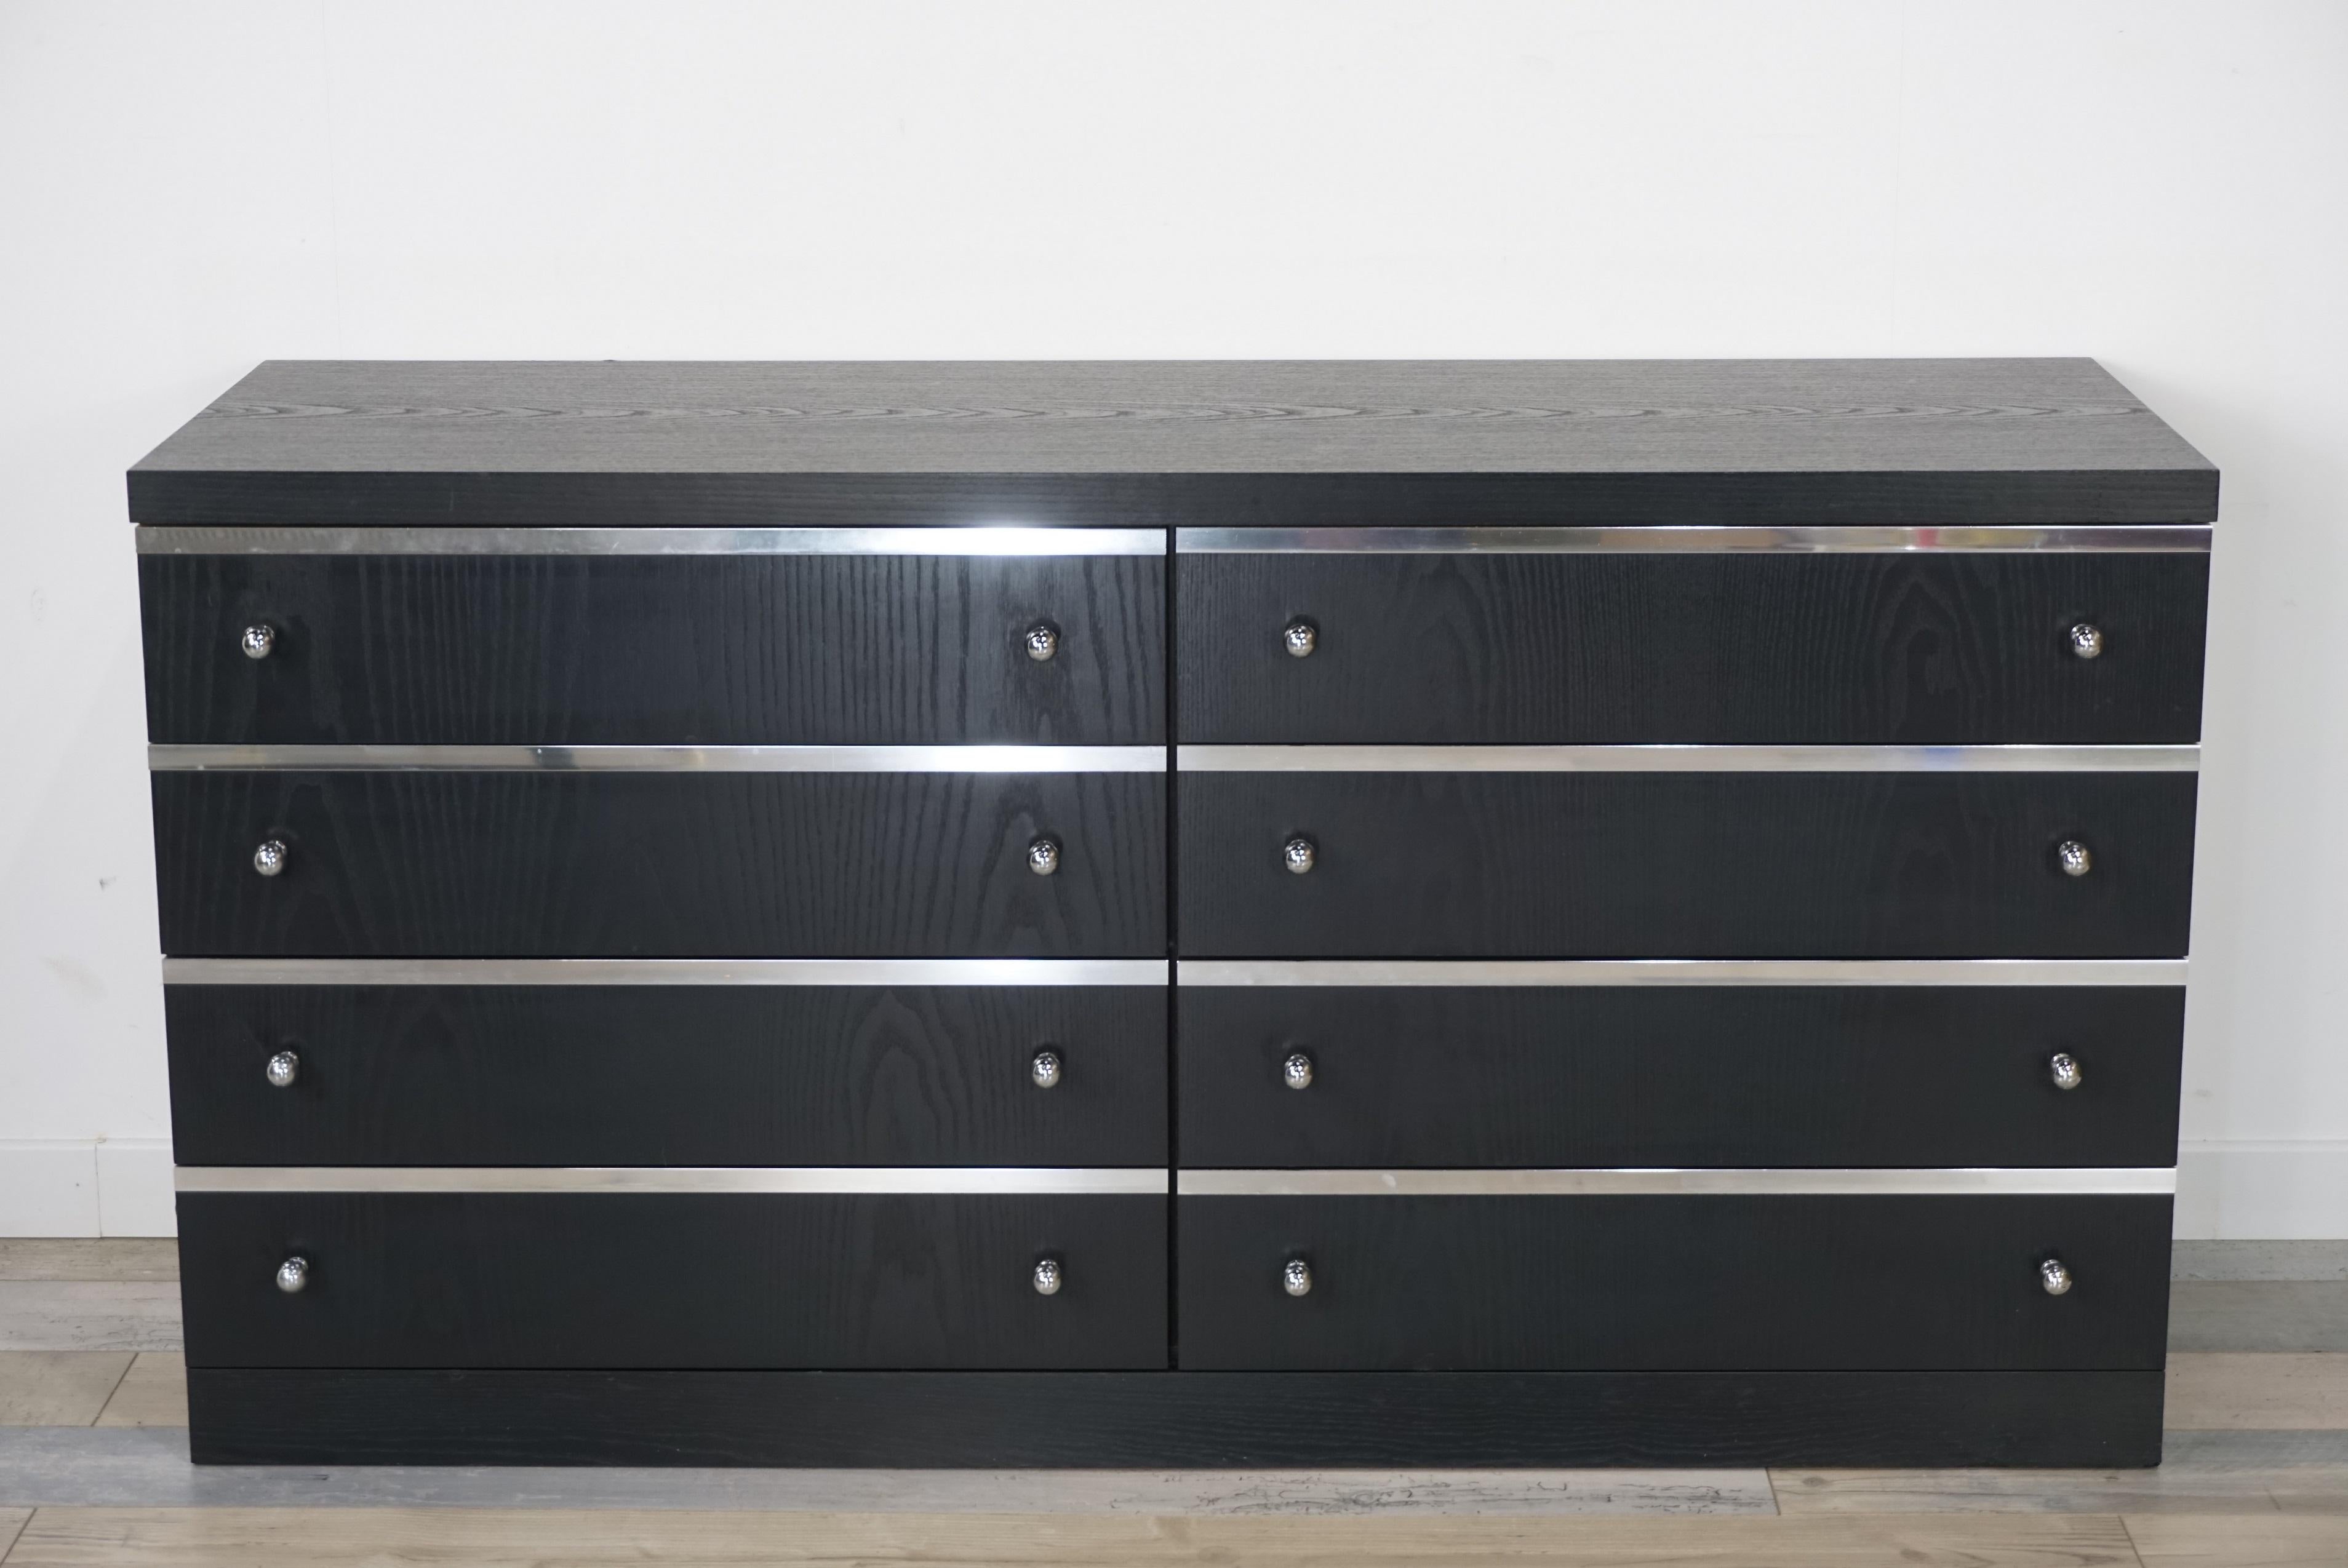 Long black wooden and chrome vintage chest of drawers with sober lines and Minimalist design offering large storage spaces: eight drawers that have for each their facade decorated with a chrome edging and chrome metal handle, too.
In very good